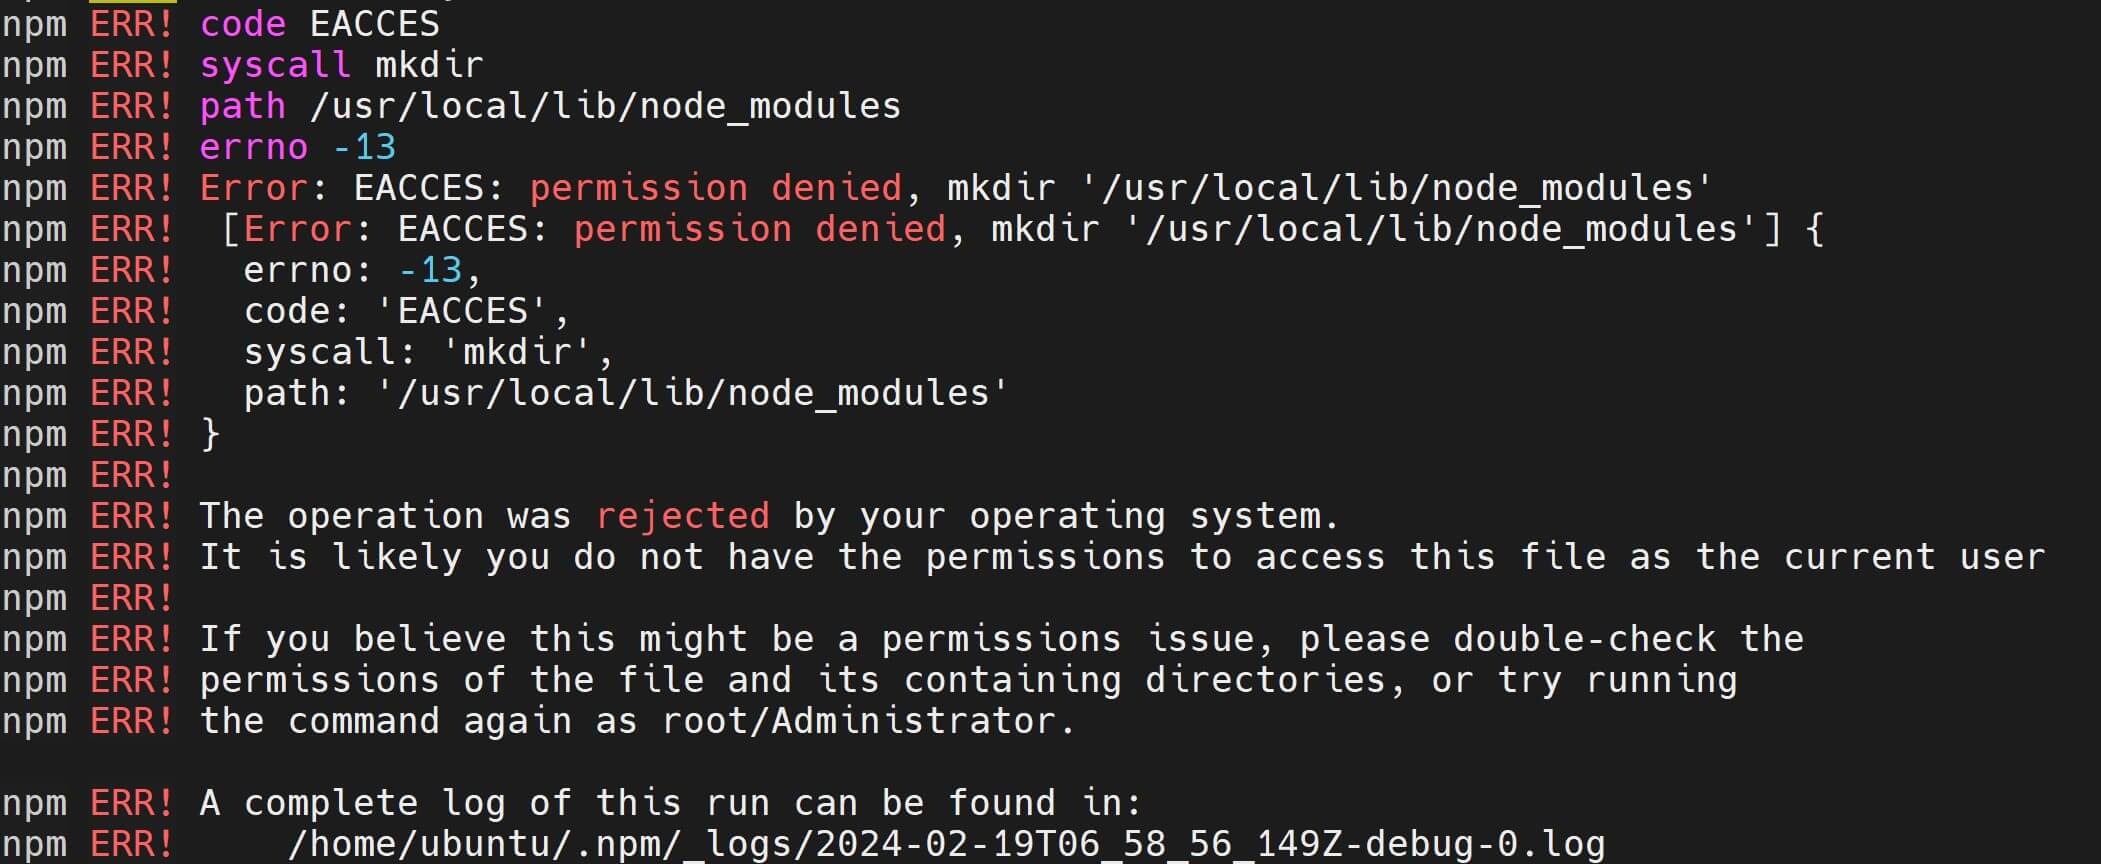 How to Install Node RED on Linux Ubuntu 20.04|22.04 LTS